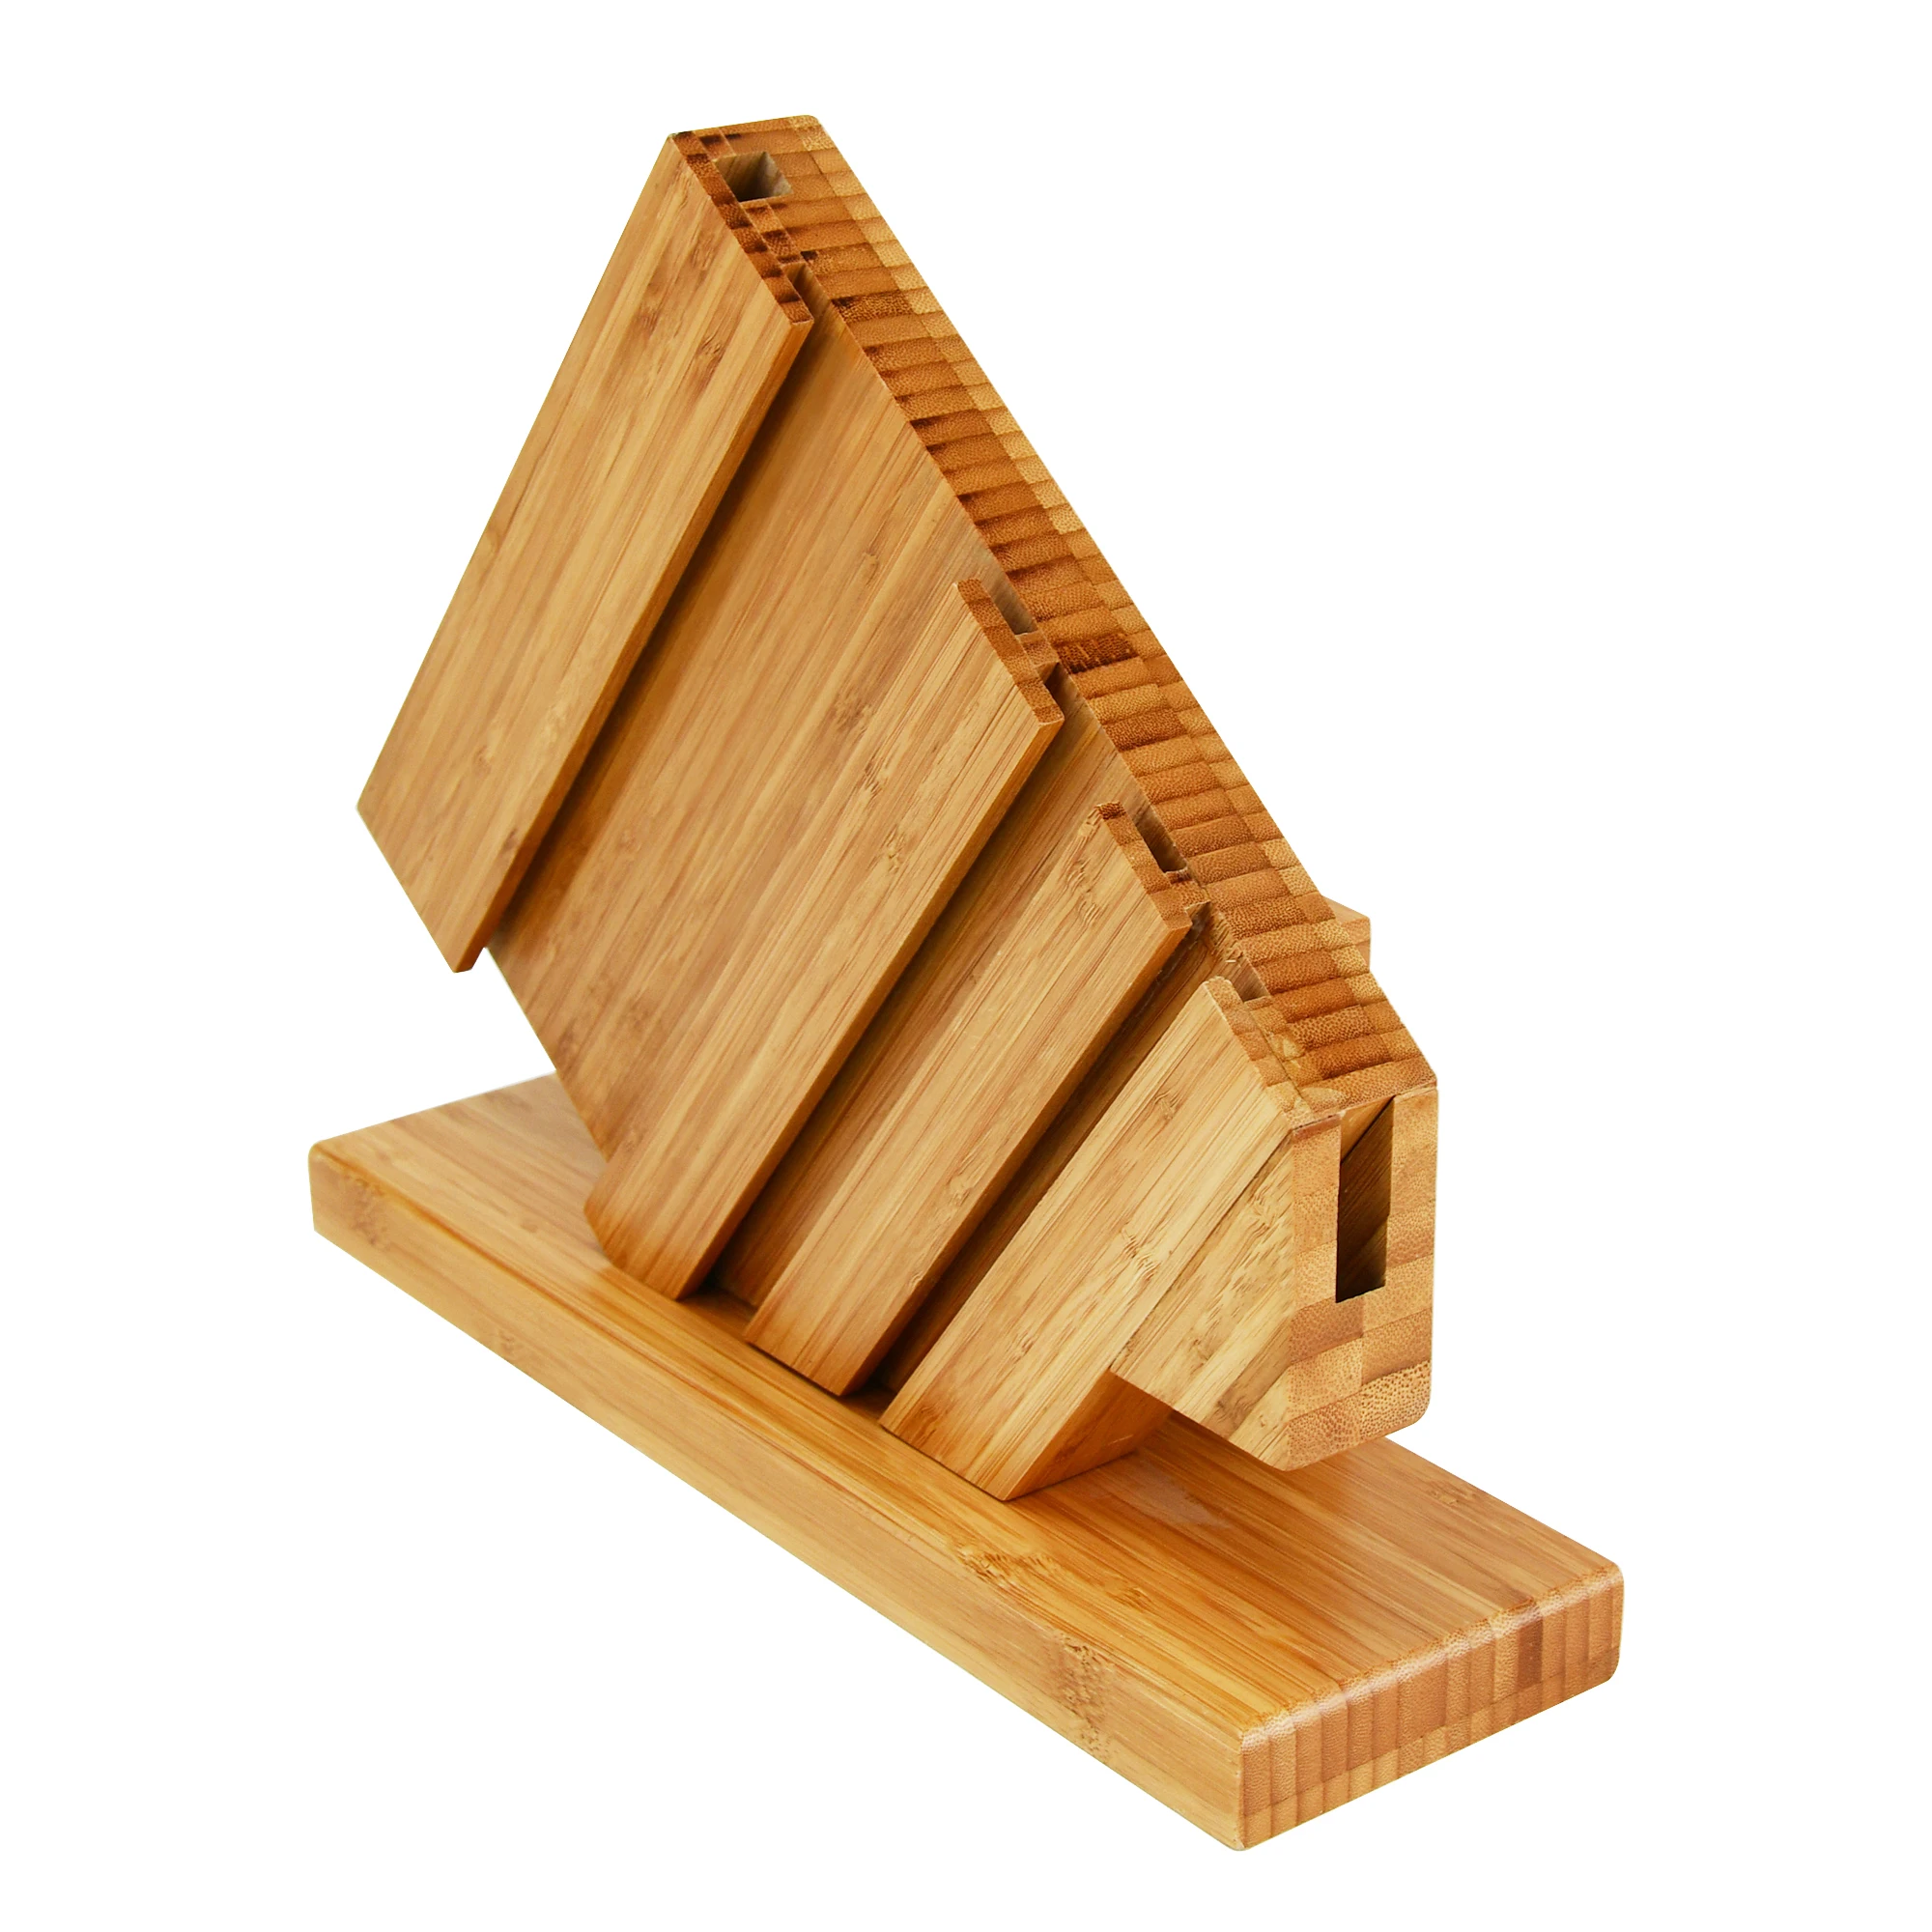 Professional Holder Bamboo Knife Stand Block Knife Holder and Organizer with Slots,Forged Kitchen Knife Holder